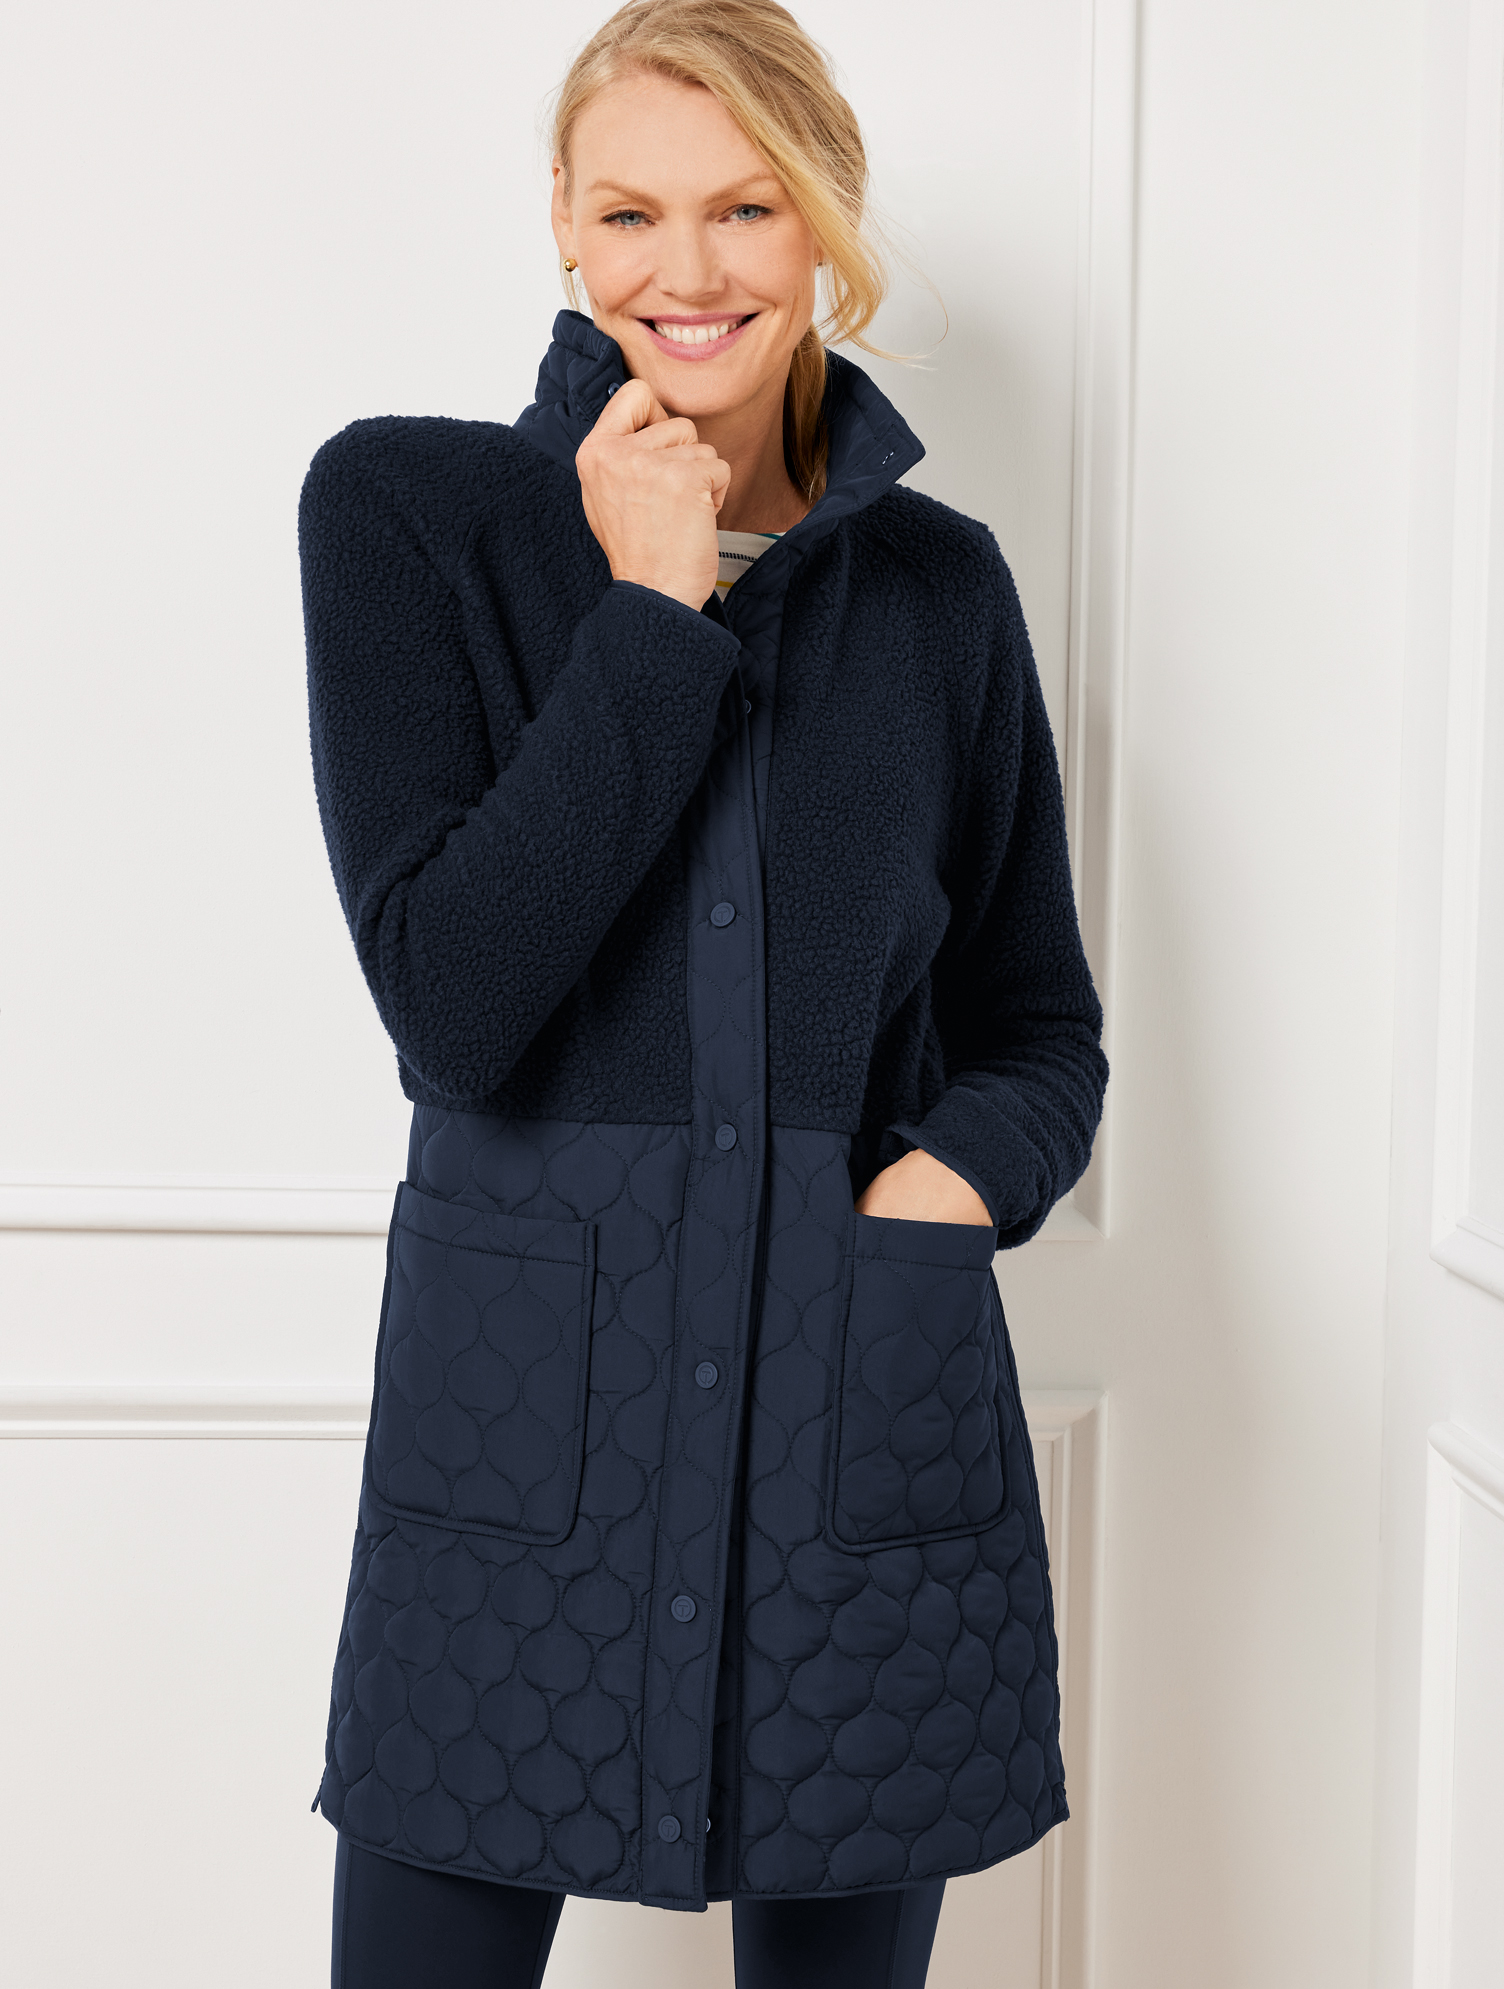 Talbots Cozy Sherpa Quilted Jacket - Blue - 1x